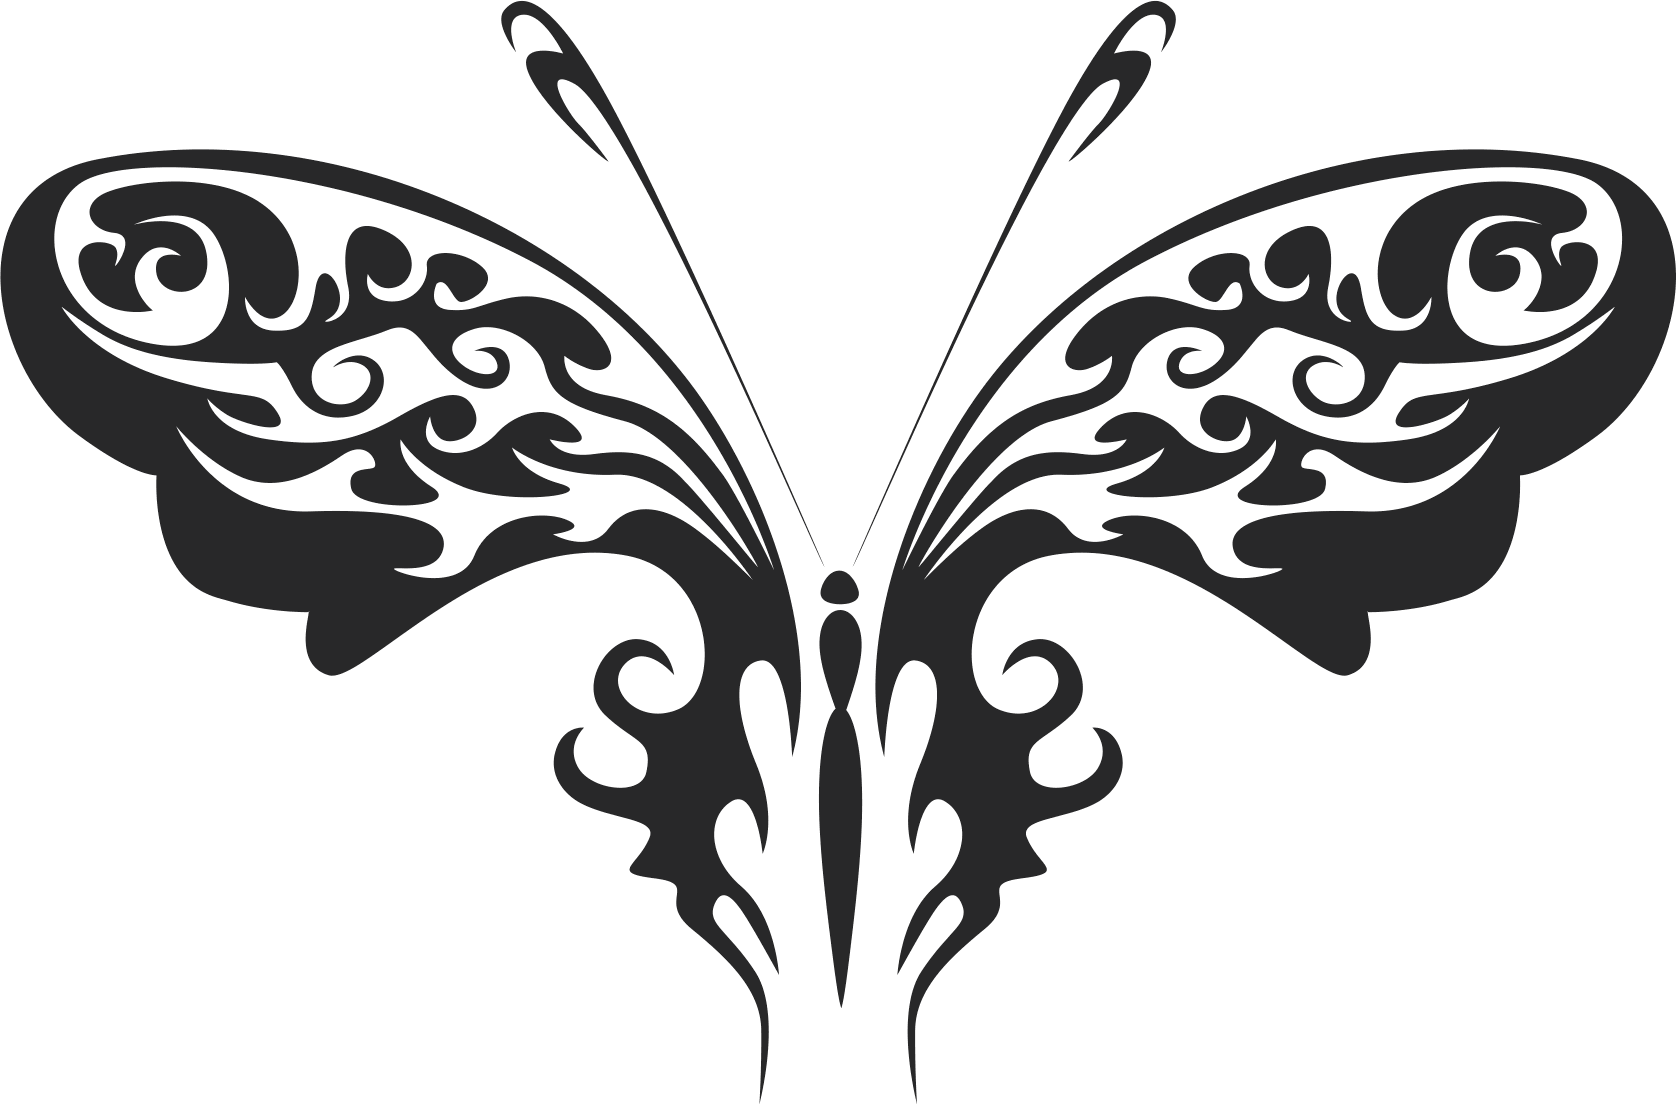 Tribal Butterfly Vector Art 30 Free DXF Vectors File